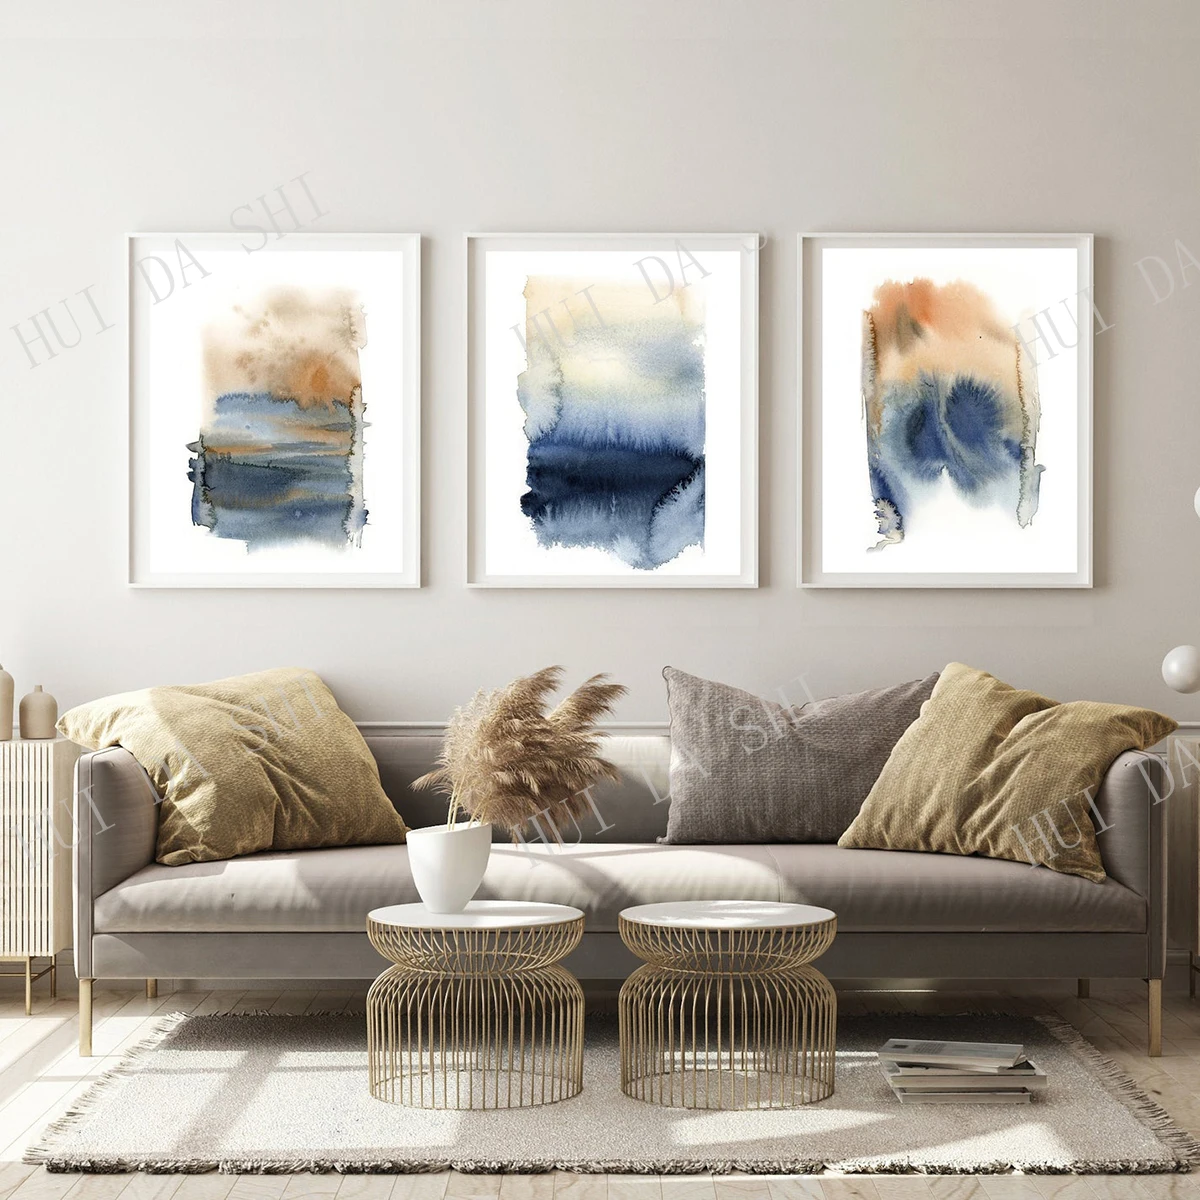 

Abstract Paintings n Blue and Terracotta Wall Prints Set, 3 Watercolor Prints, Abstract Painting Art, Landscape Set of 3 Prints